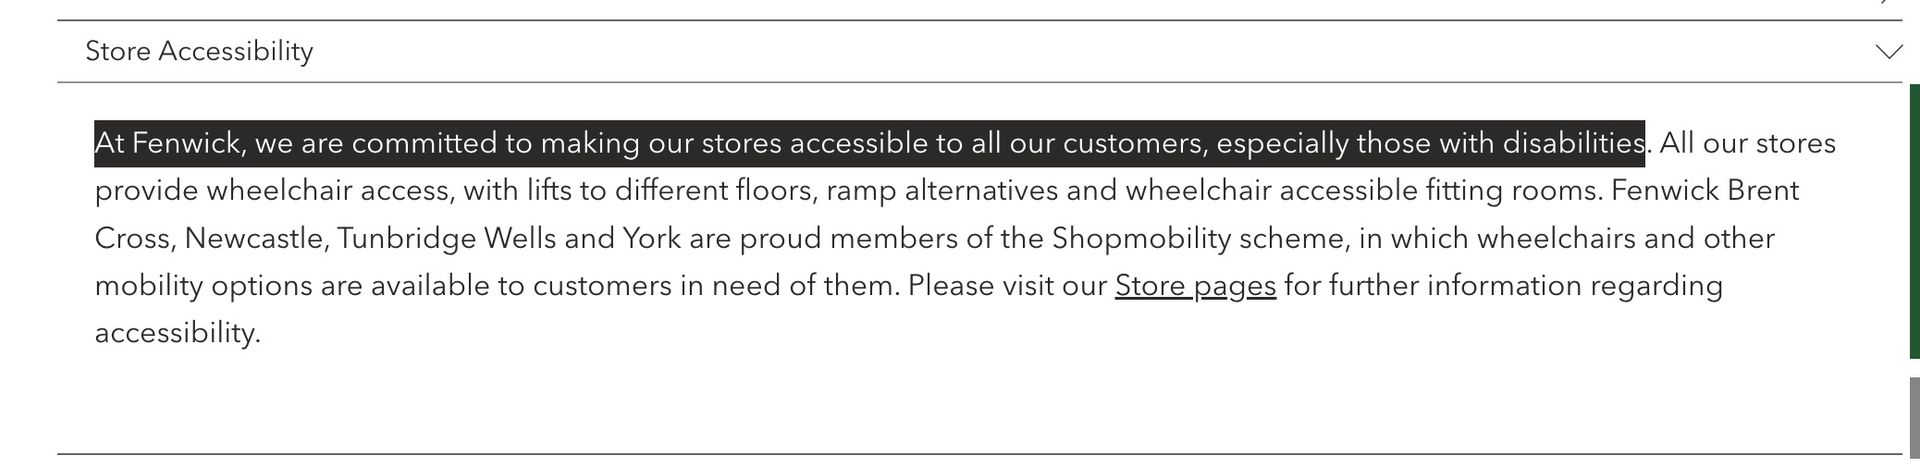 screenshot of the Fenwick homepage in August 2023, highlighting the text of a FAQ section that reads: At Fenwick, we are committed to making our stores accessible to all our customers, especially those with disabilities. All our stores provide wheelchair access, with lifts to different floors, ramp alternatives and wheelchair accessible fitting rooms. Fenwick Brent Cross, Newcastle, Tunbridge Wells and York are proud members of the Shopmobility scheme, in which wheelchairs and other mobility options are available to customers in need of them. Please visit our Store pages for further information regarding accessibility.